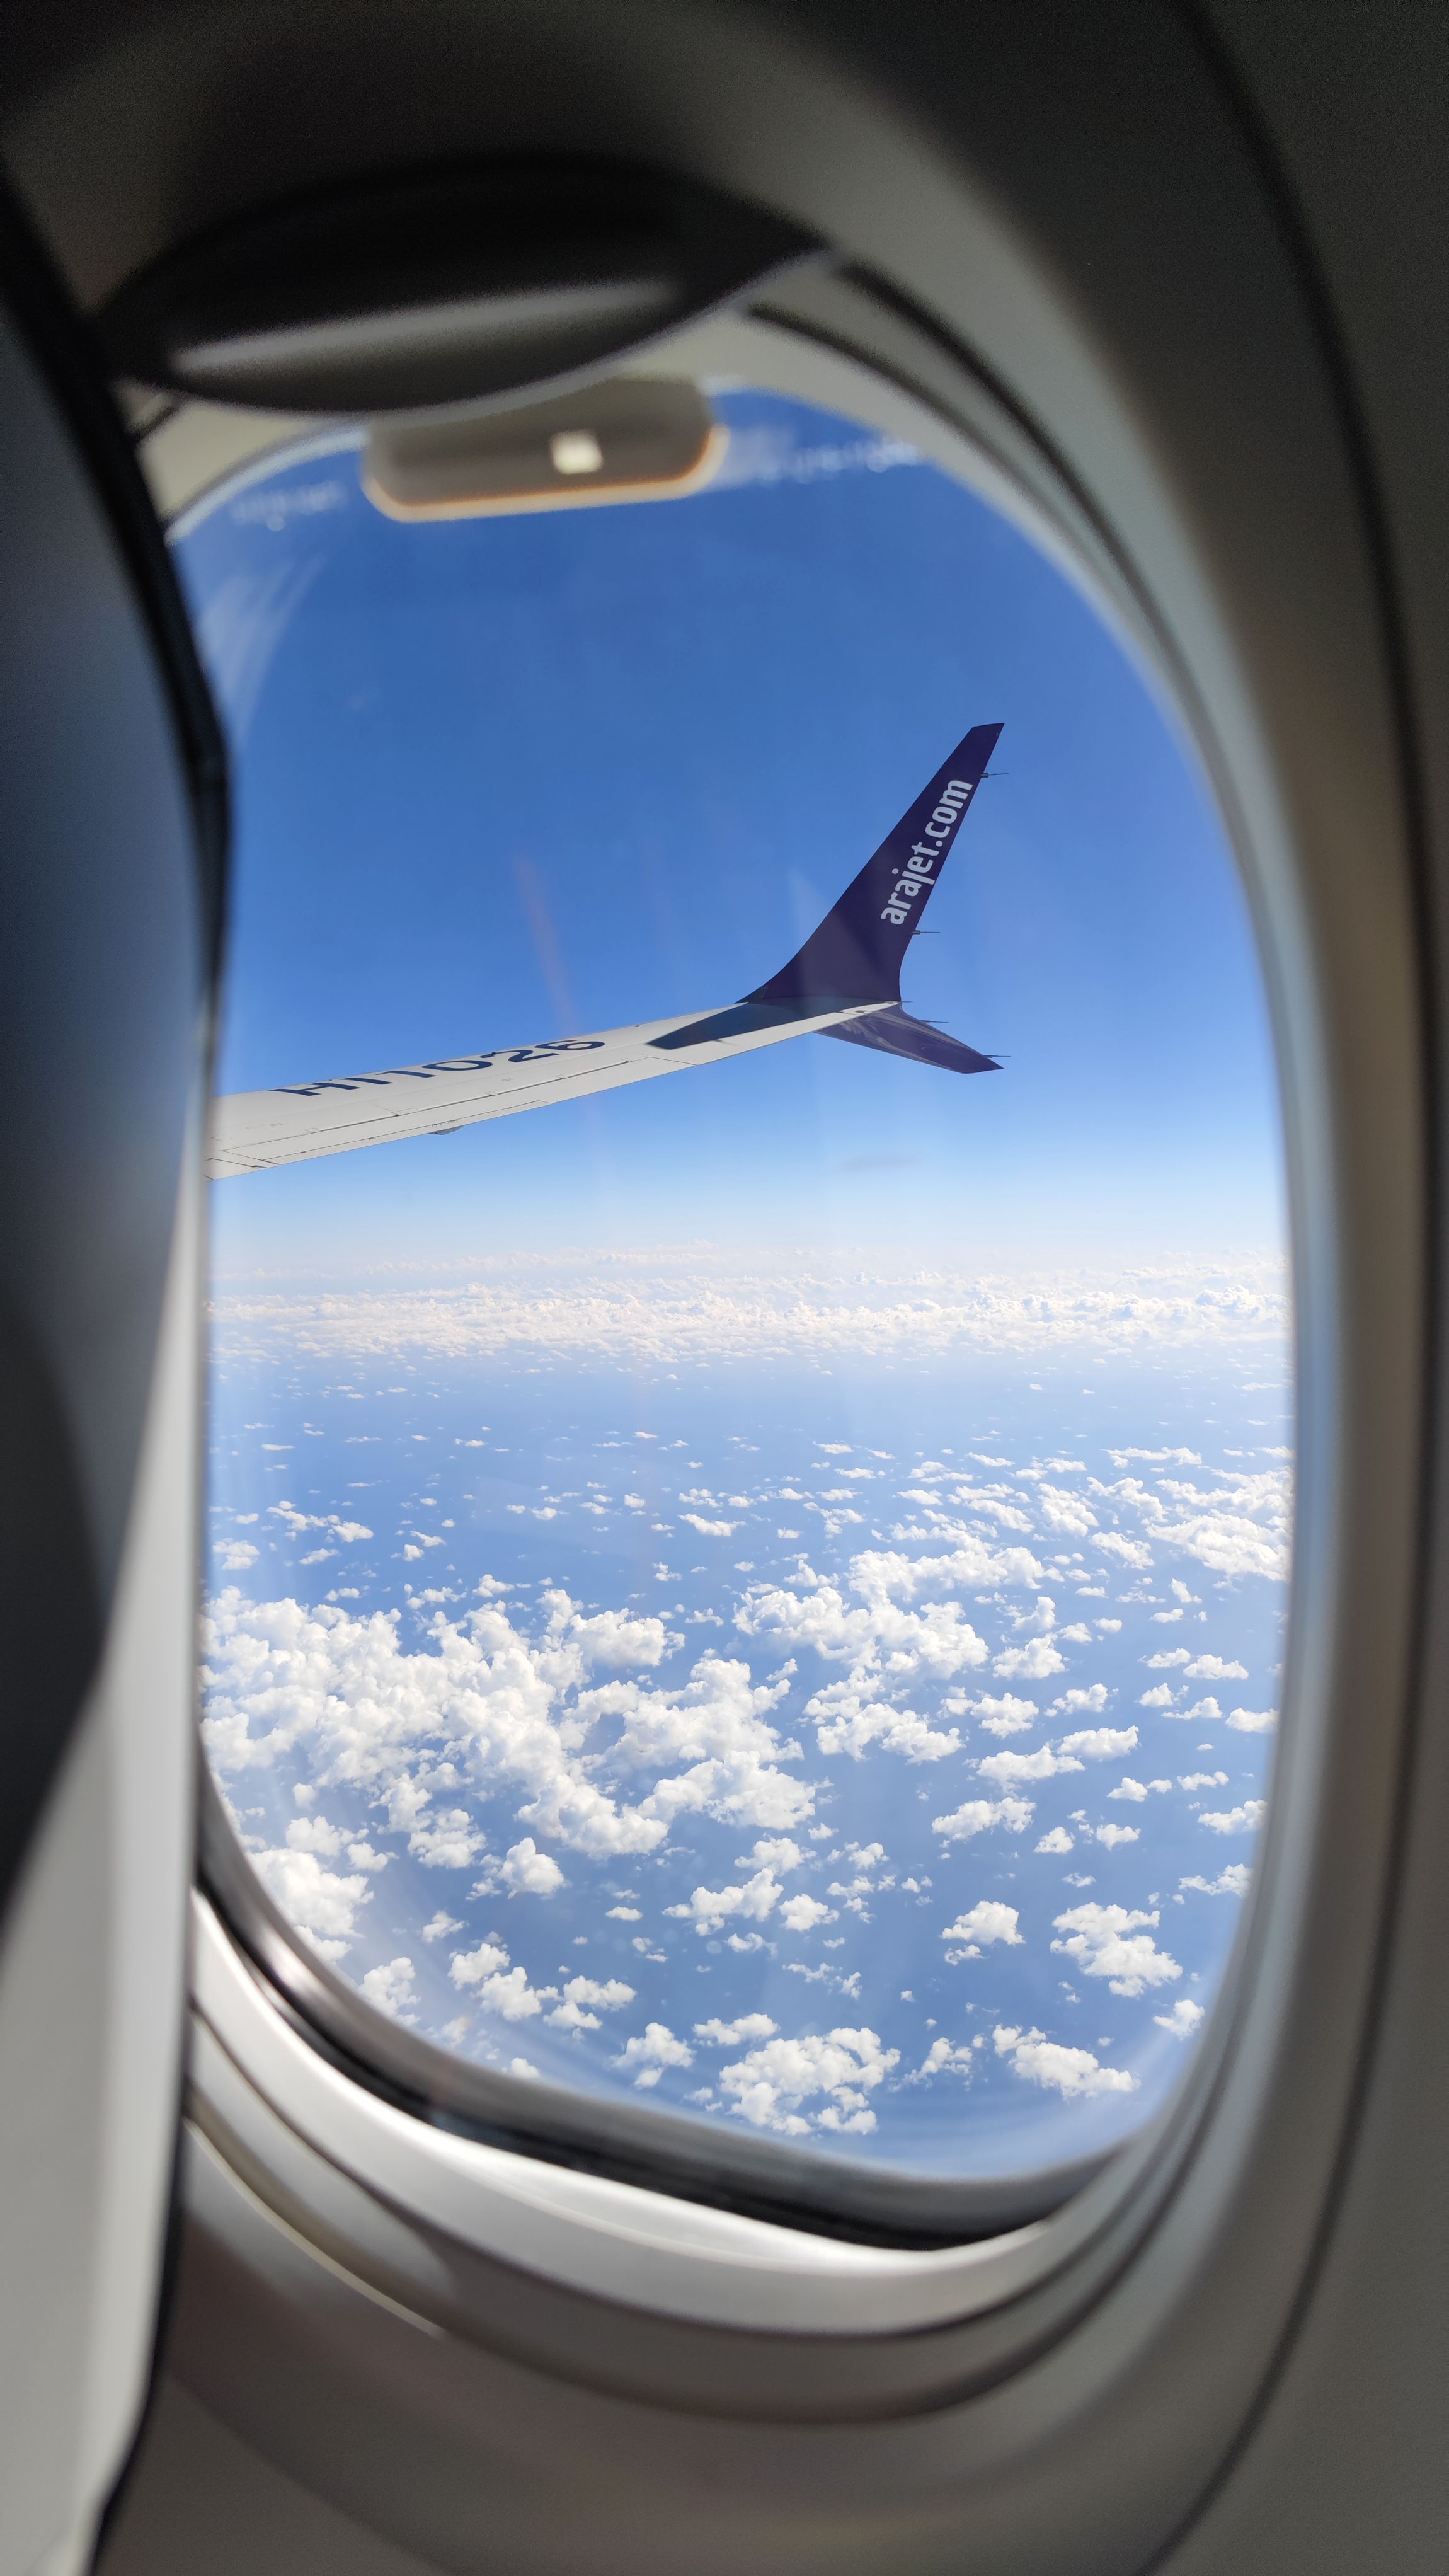 A view of a wingtip of an Arajet Boeing 737 MAX 8 aircraft from a window while in the air